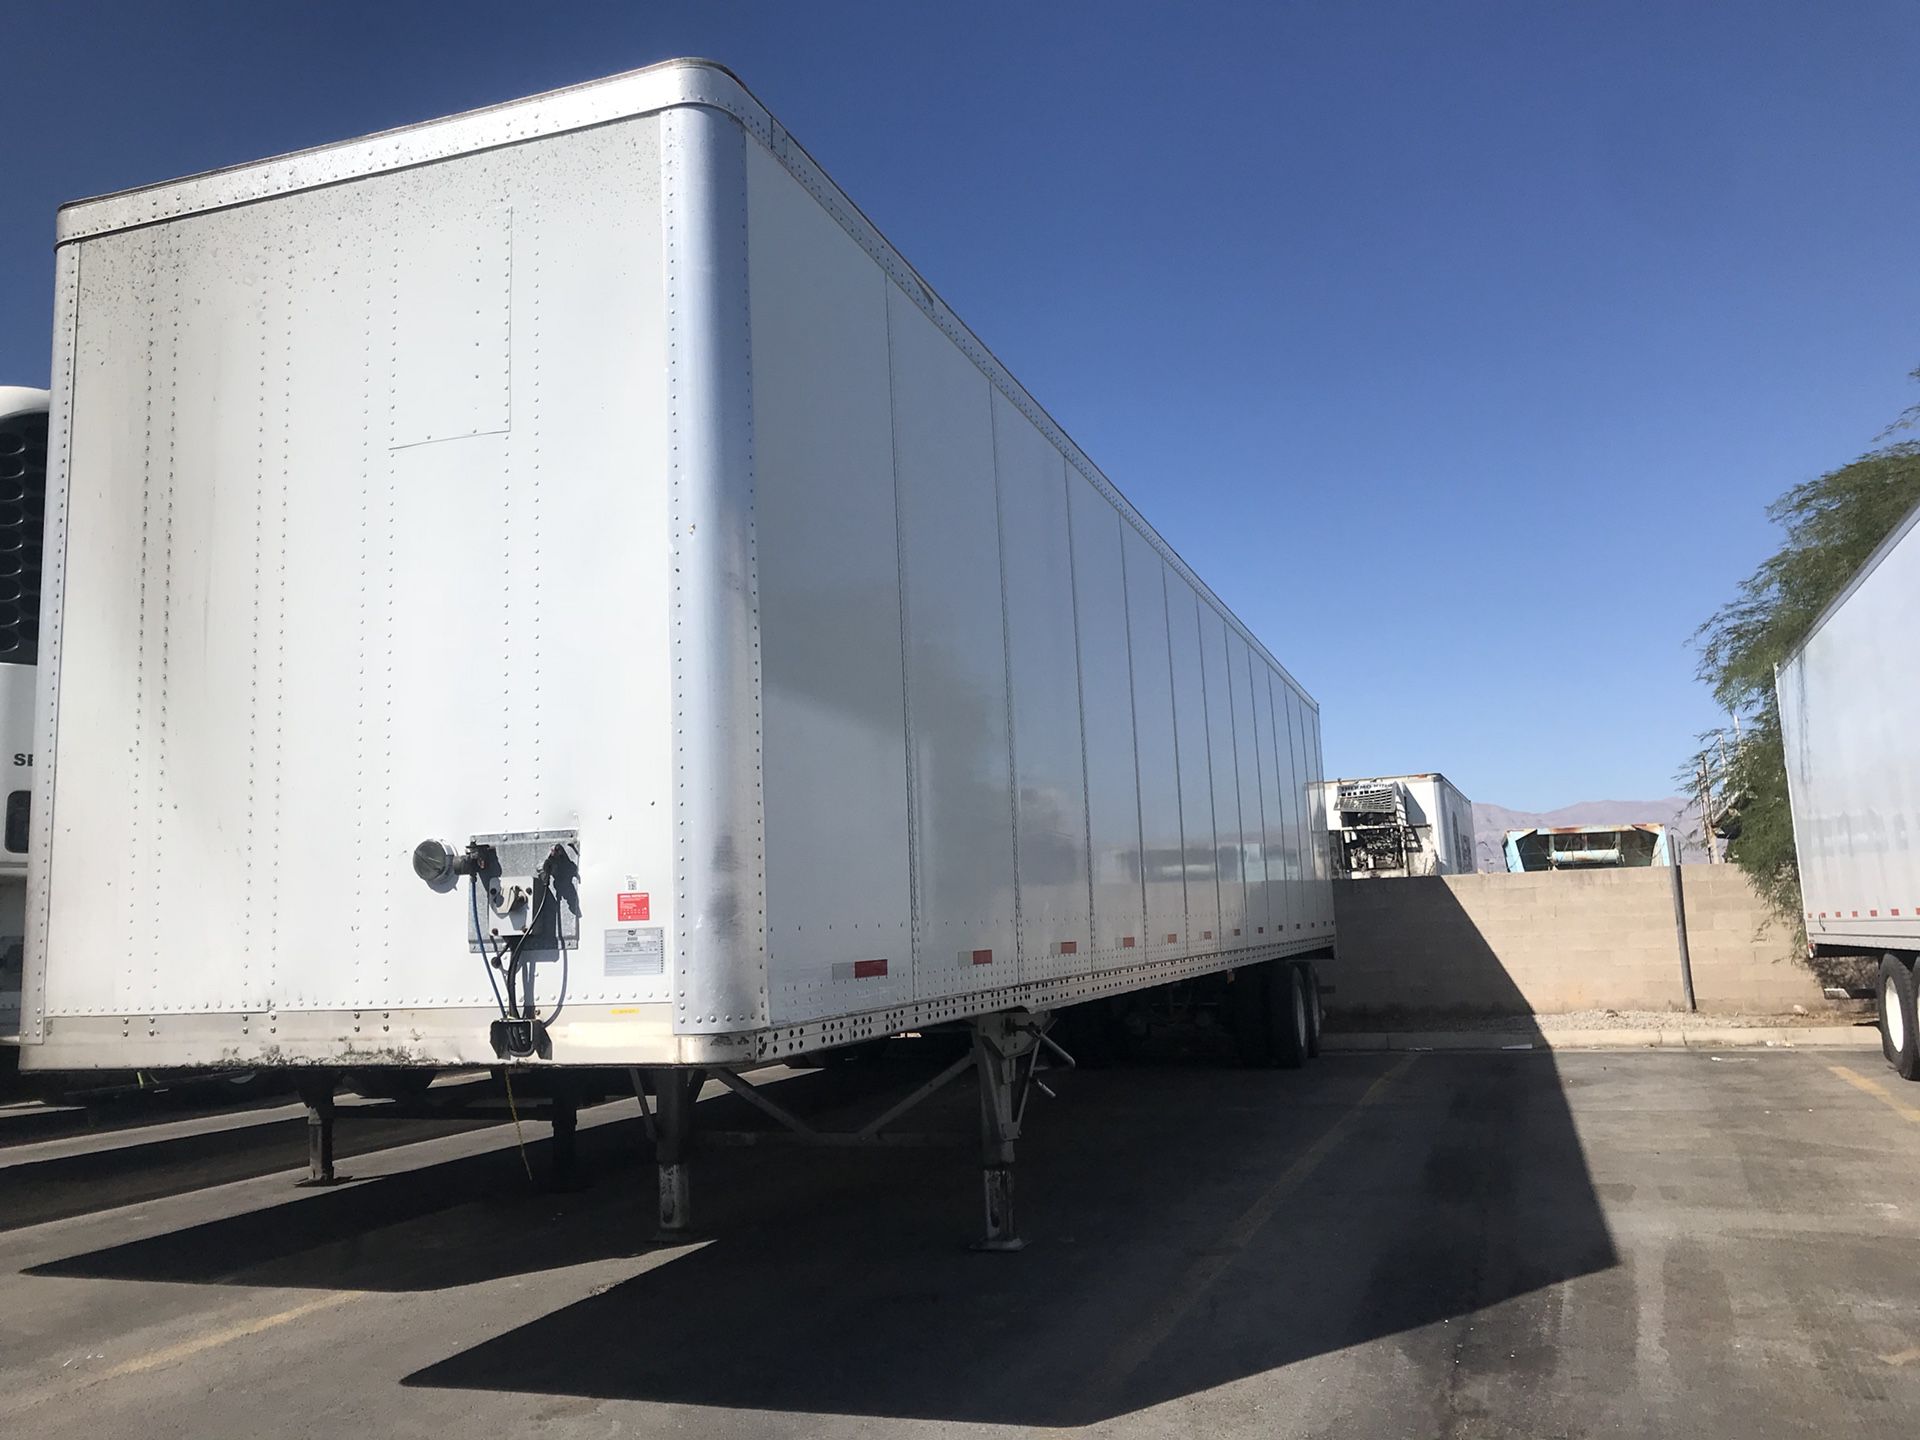 Wabash trailer 2004 air ride price $14,000.00 o better offers